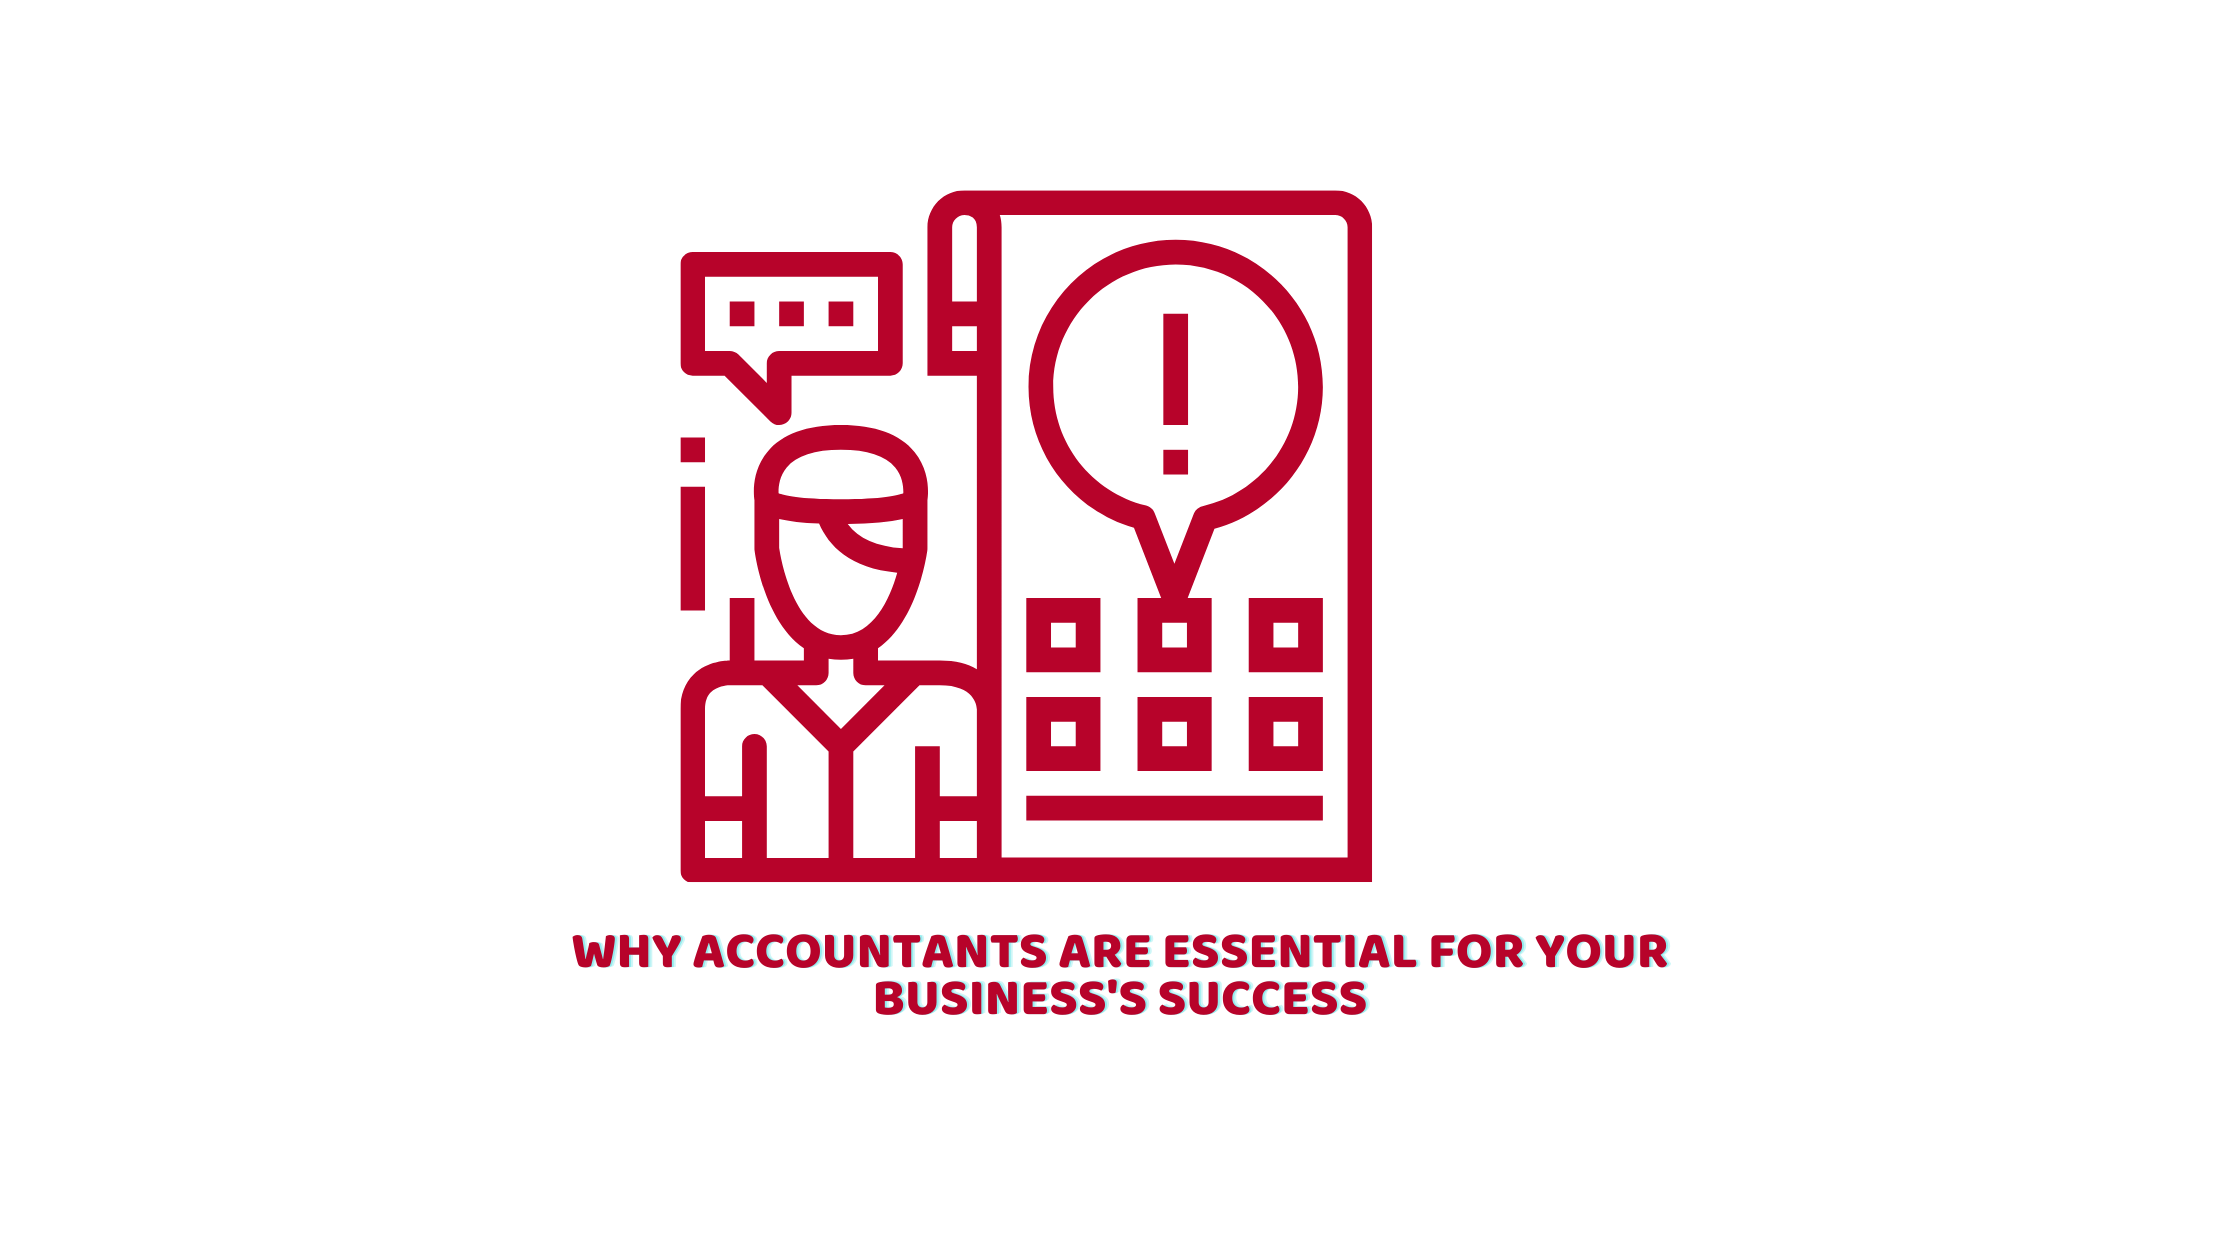 Why Accountants Are Essential for Your Business's Success